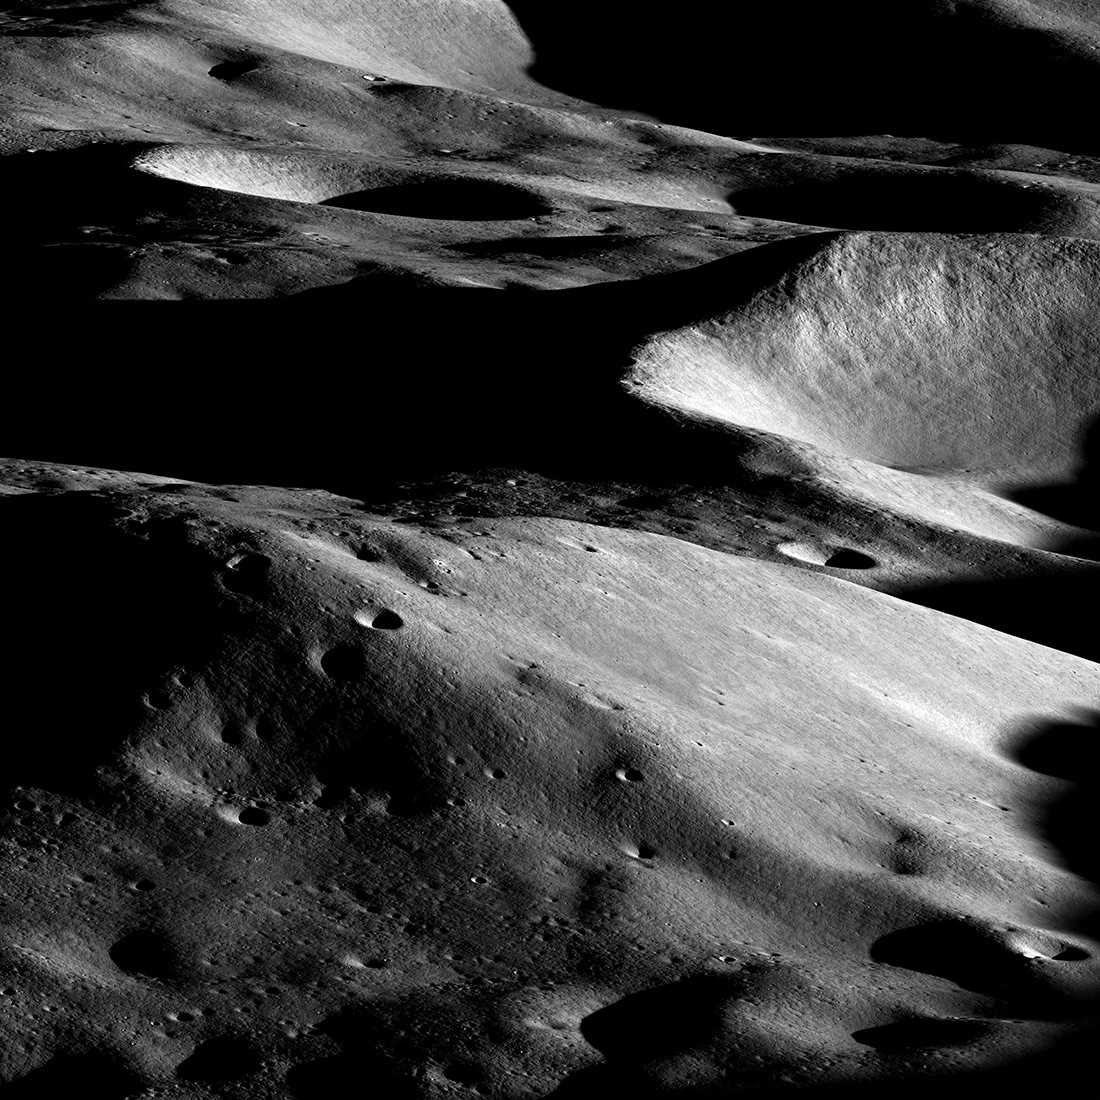 Dramatic grayscale image of a mountainous lunar landscape. Large craters with black shadows inside are visible in the background. In the foreground, a mountain is sunlit from the right and pocked with small craters. 